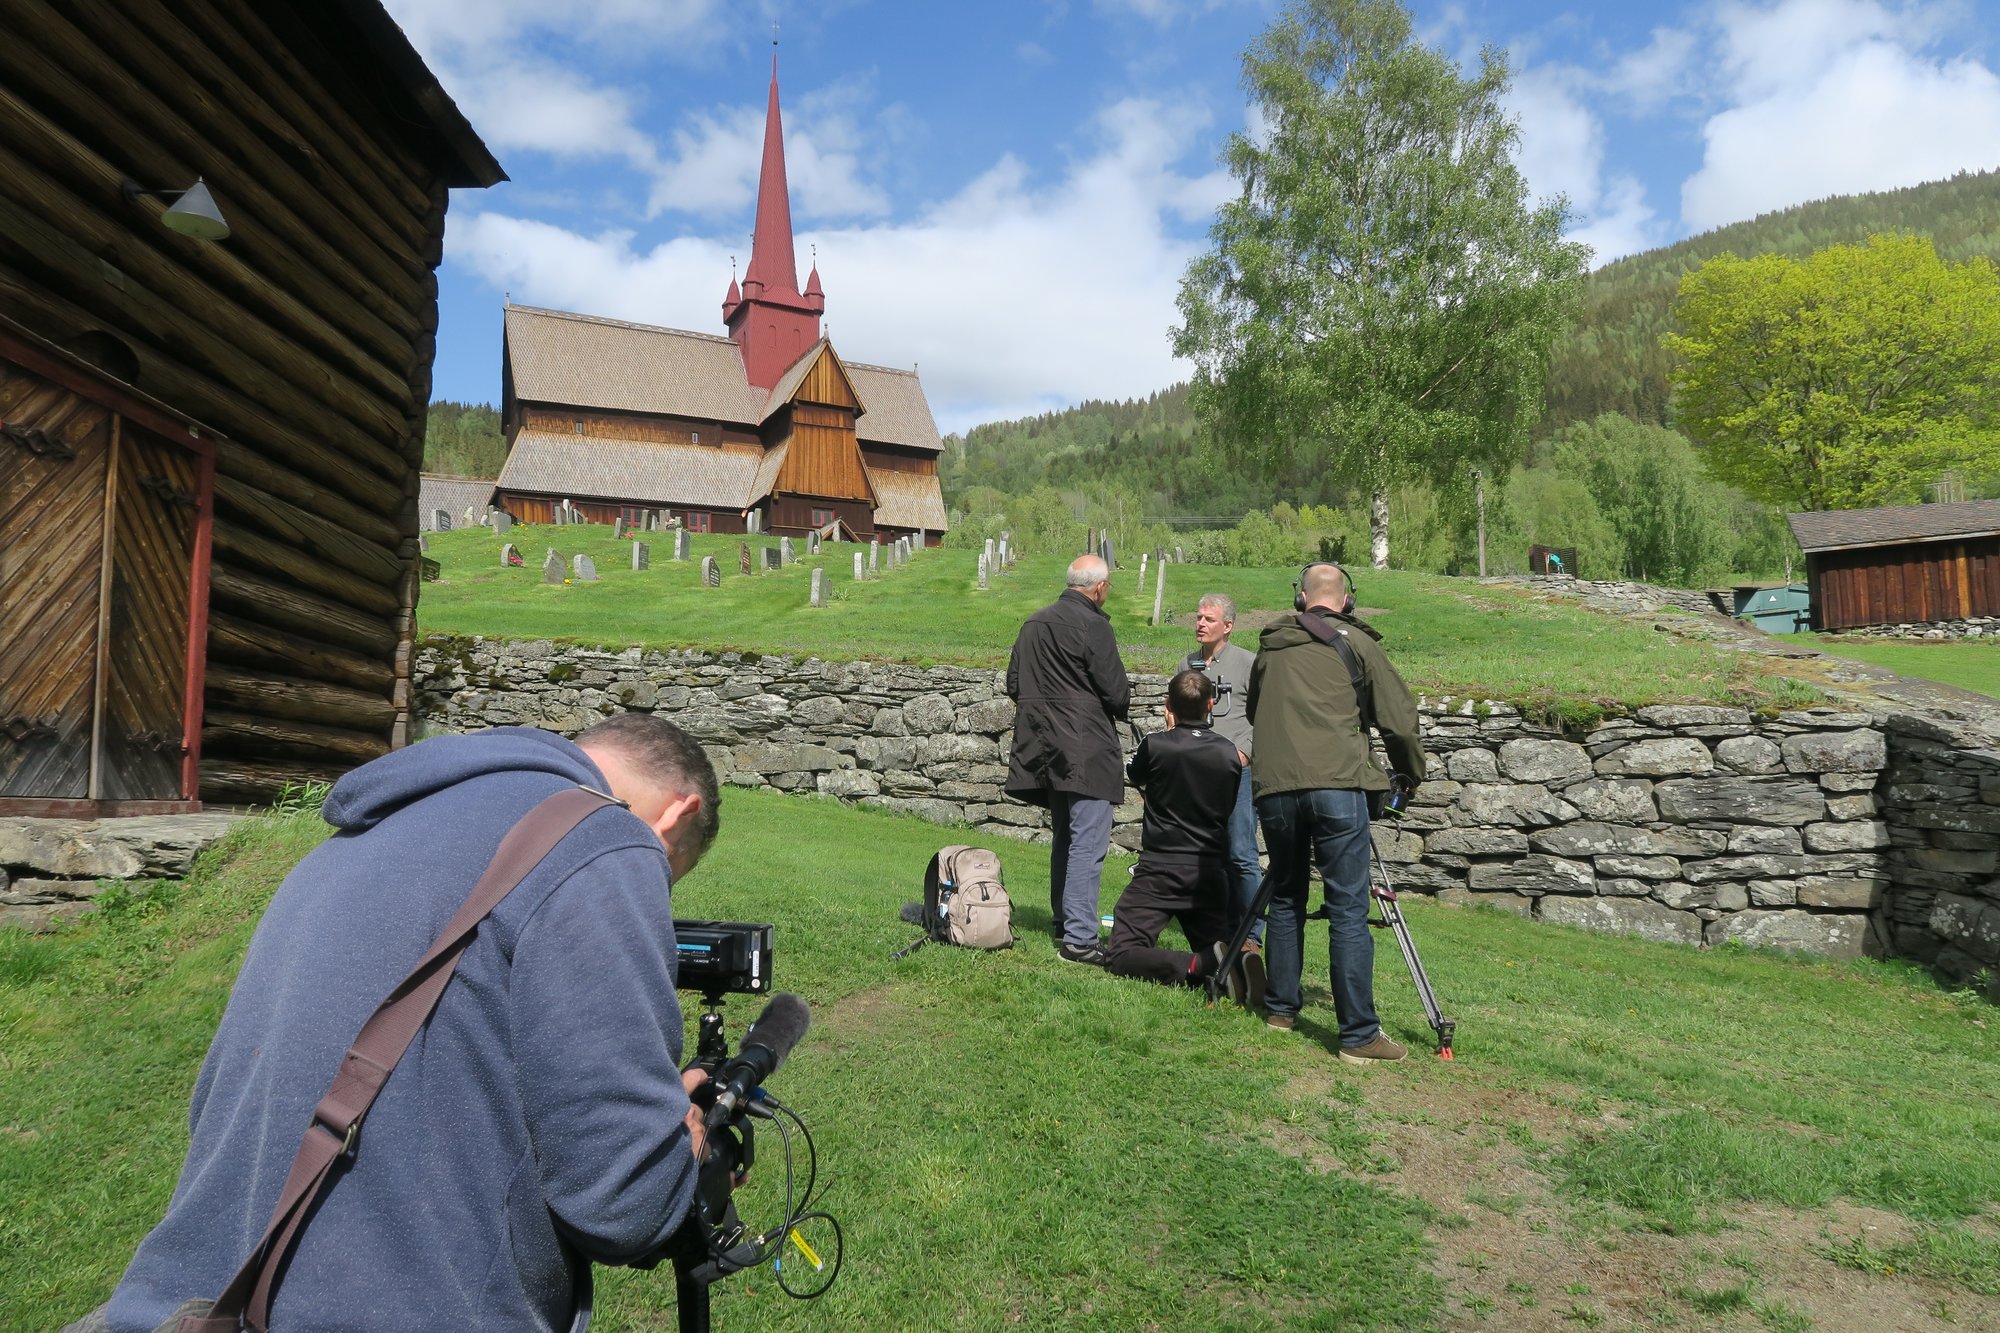 Lars Mytting interviewed by Christhard Läpple from ZDF in front of Ringebu Stave Church.